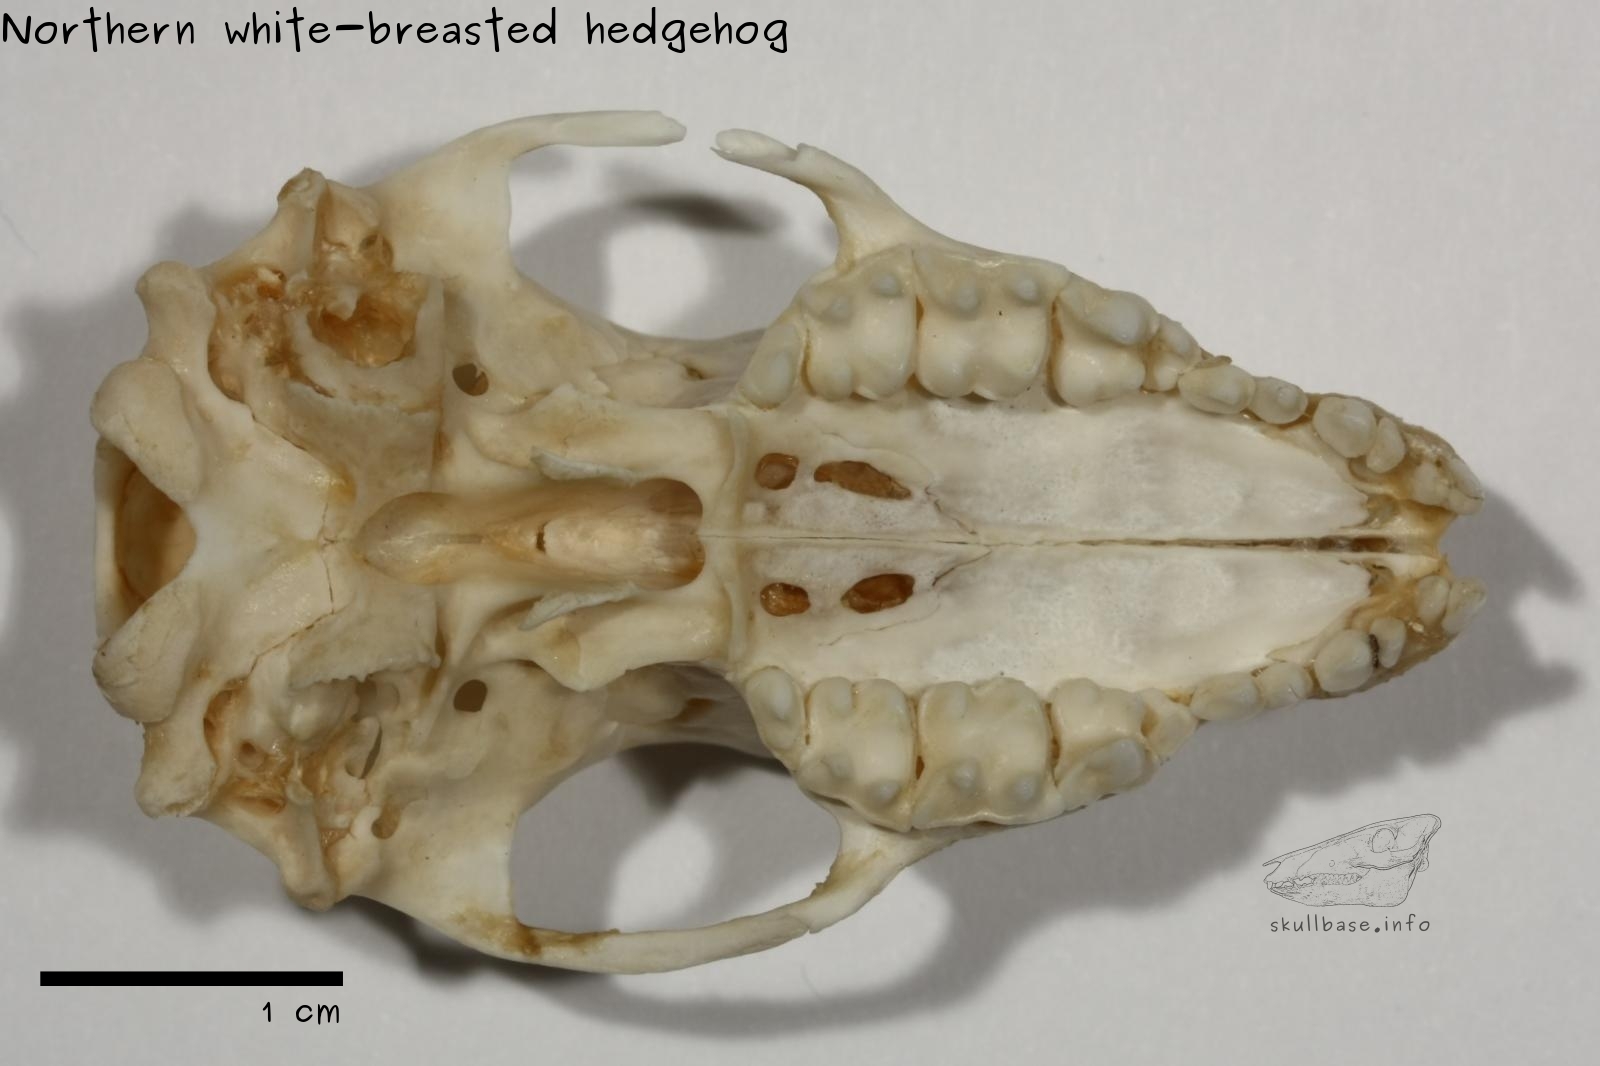 Northern white-breasted hedgehog (Erinaceus roumanicus) skull ventral view